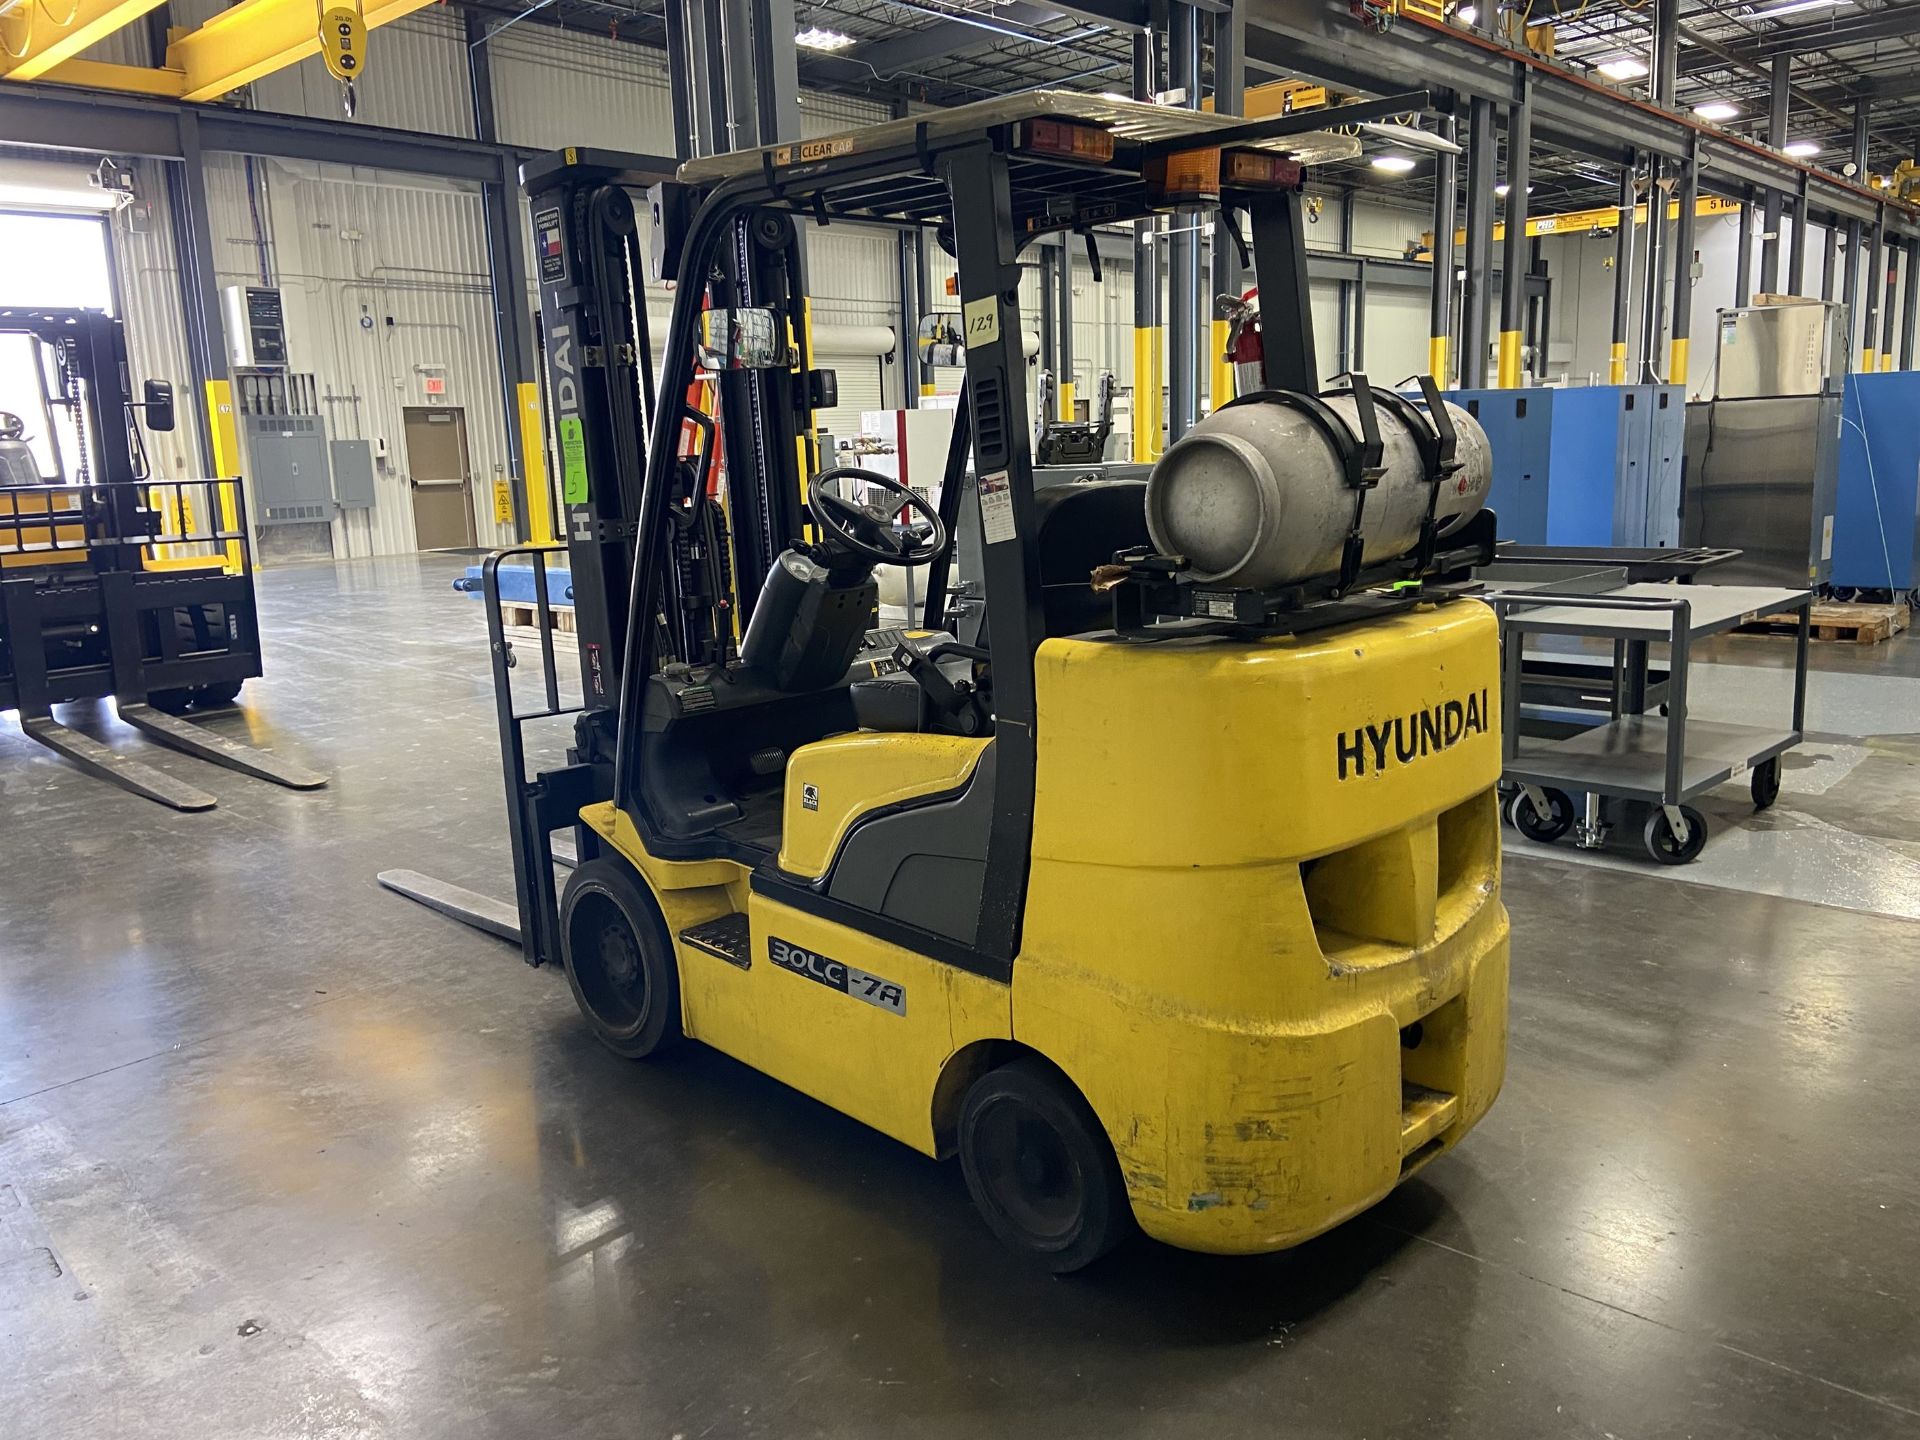 HYUNDAI 30LC-7A 5,459 Lb LP Forklift, s/n HHKHHC09PD0000172, w/ Accu-Tilt 185" 3 Stage Mast, 60" - Image 2 of 9